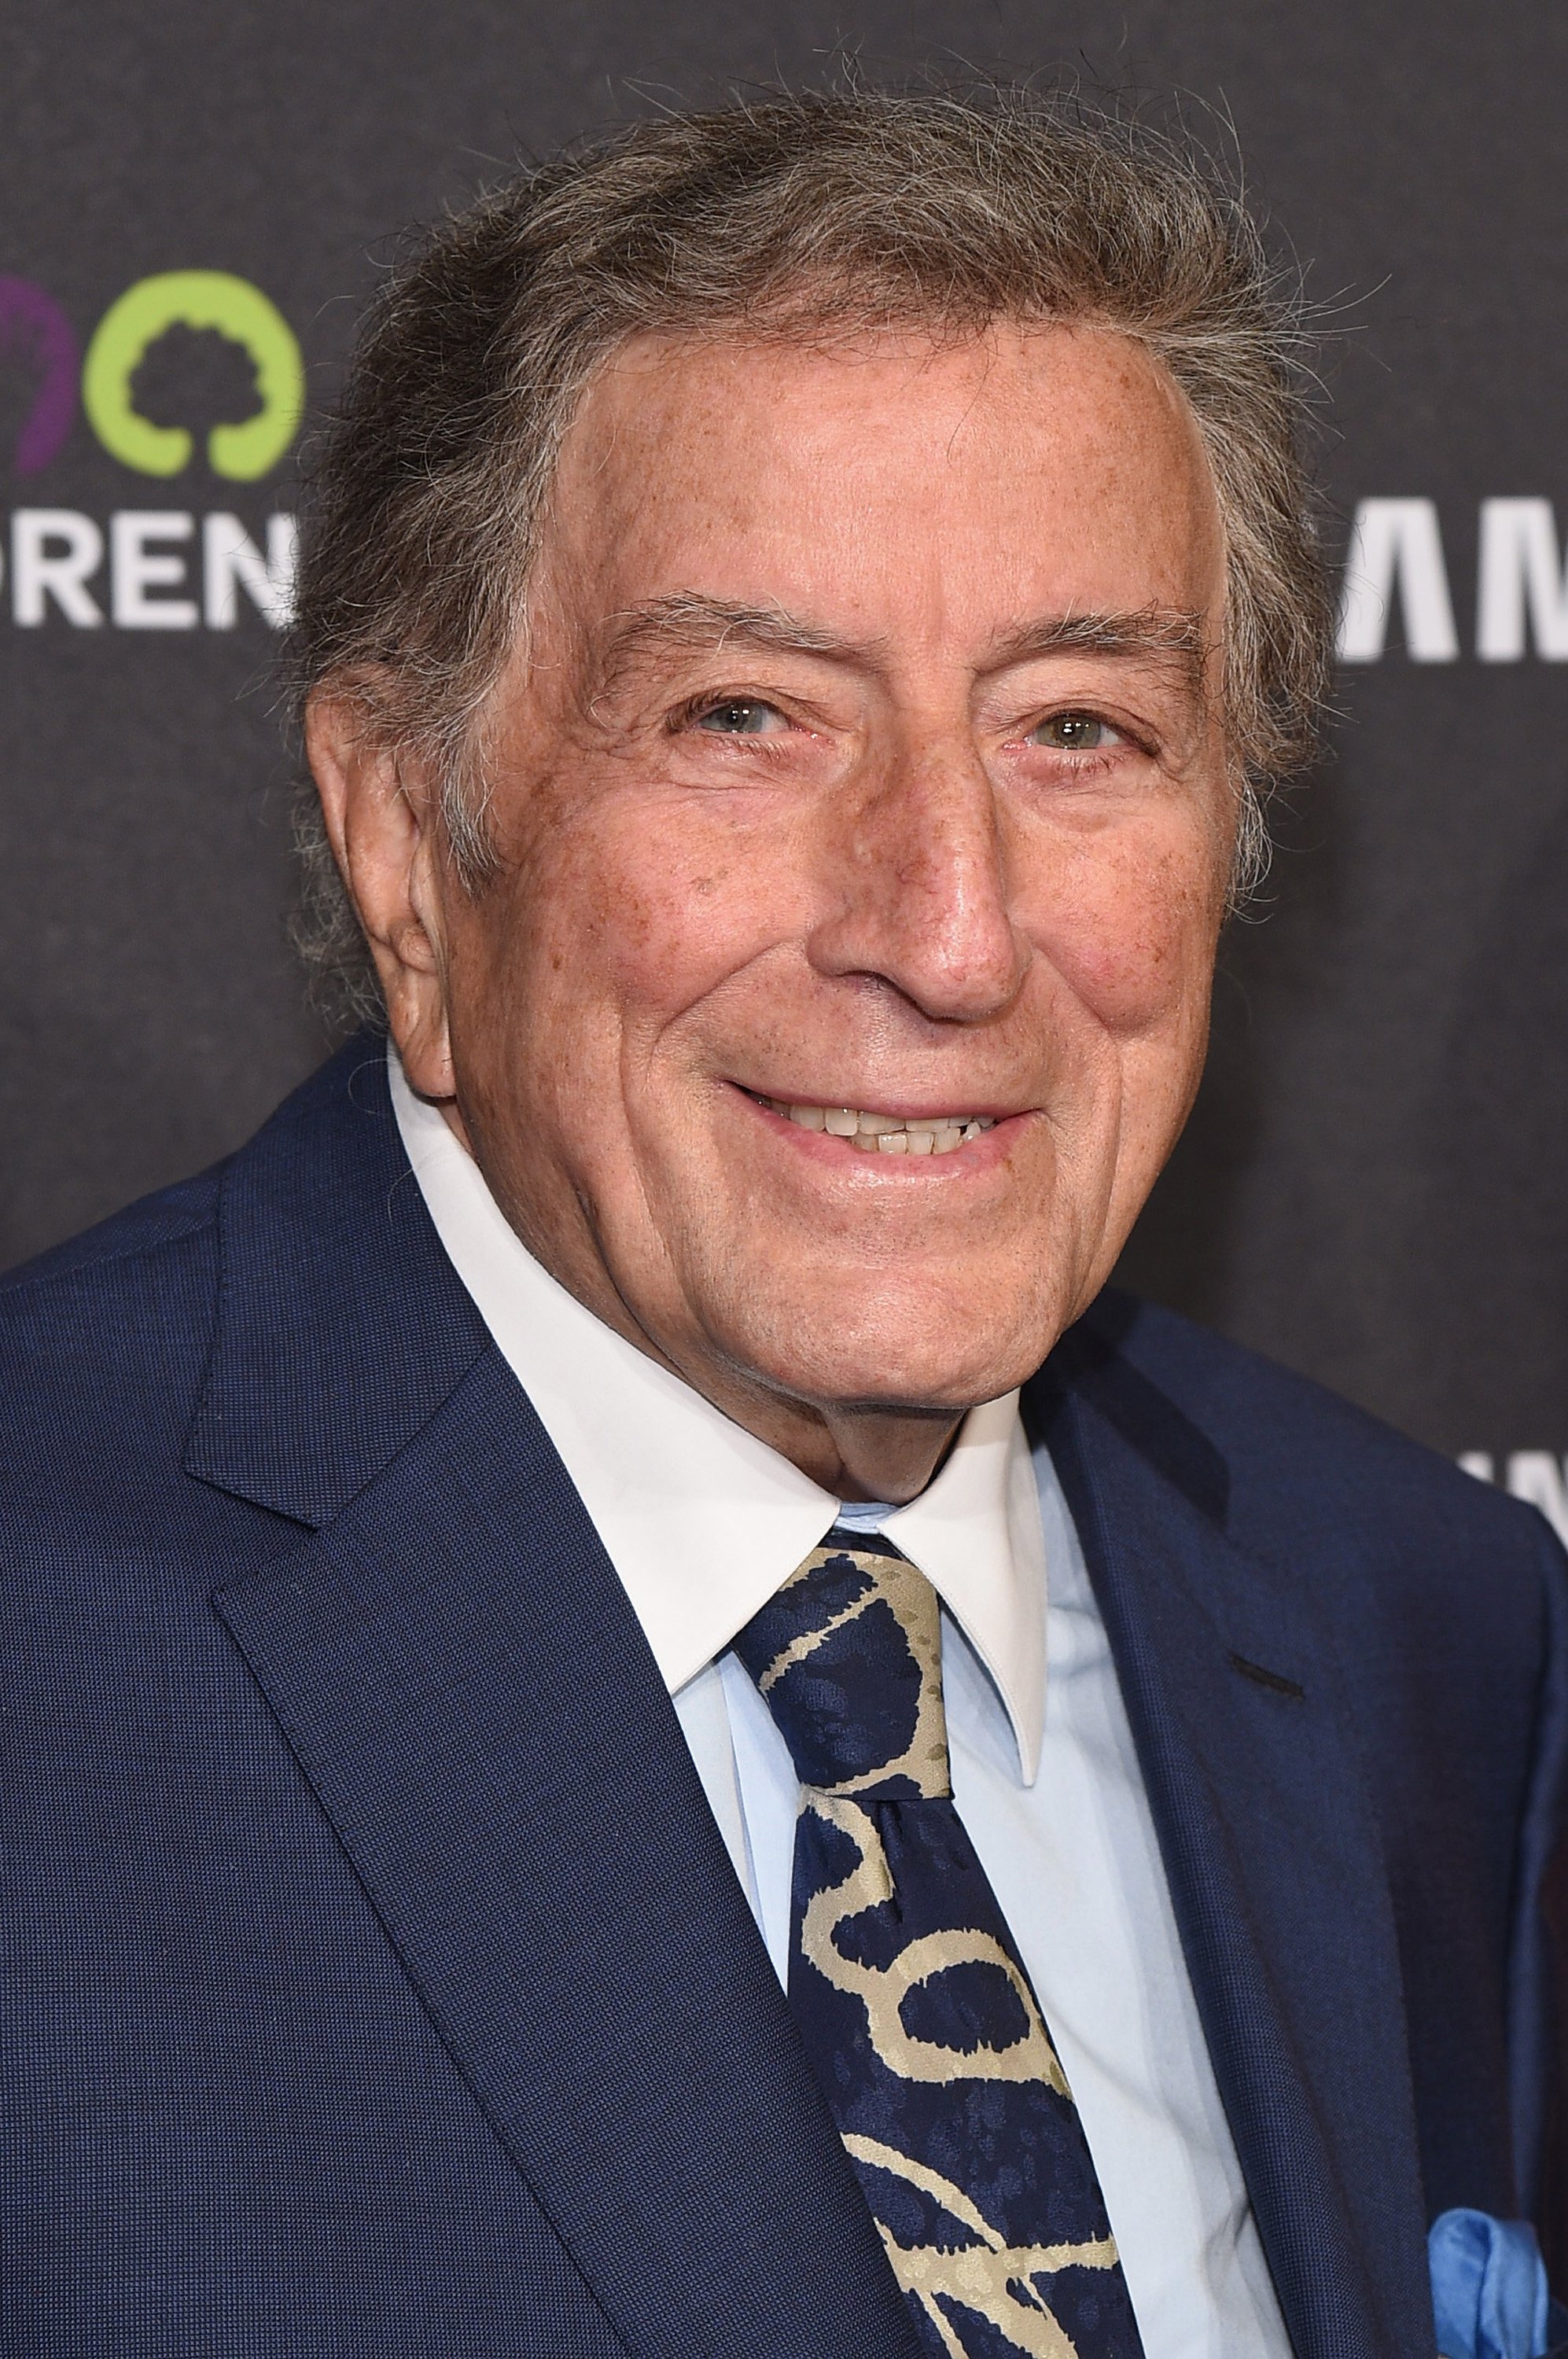 Tony Bennett attending the Hope for Children Gala at the Hammerstein Ballroom.  Source | Photo: Getty Images